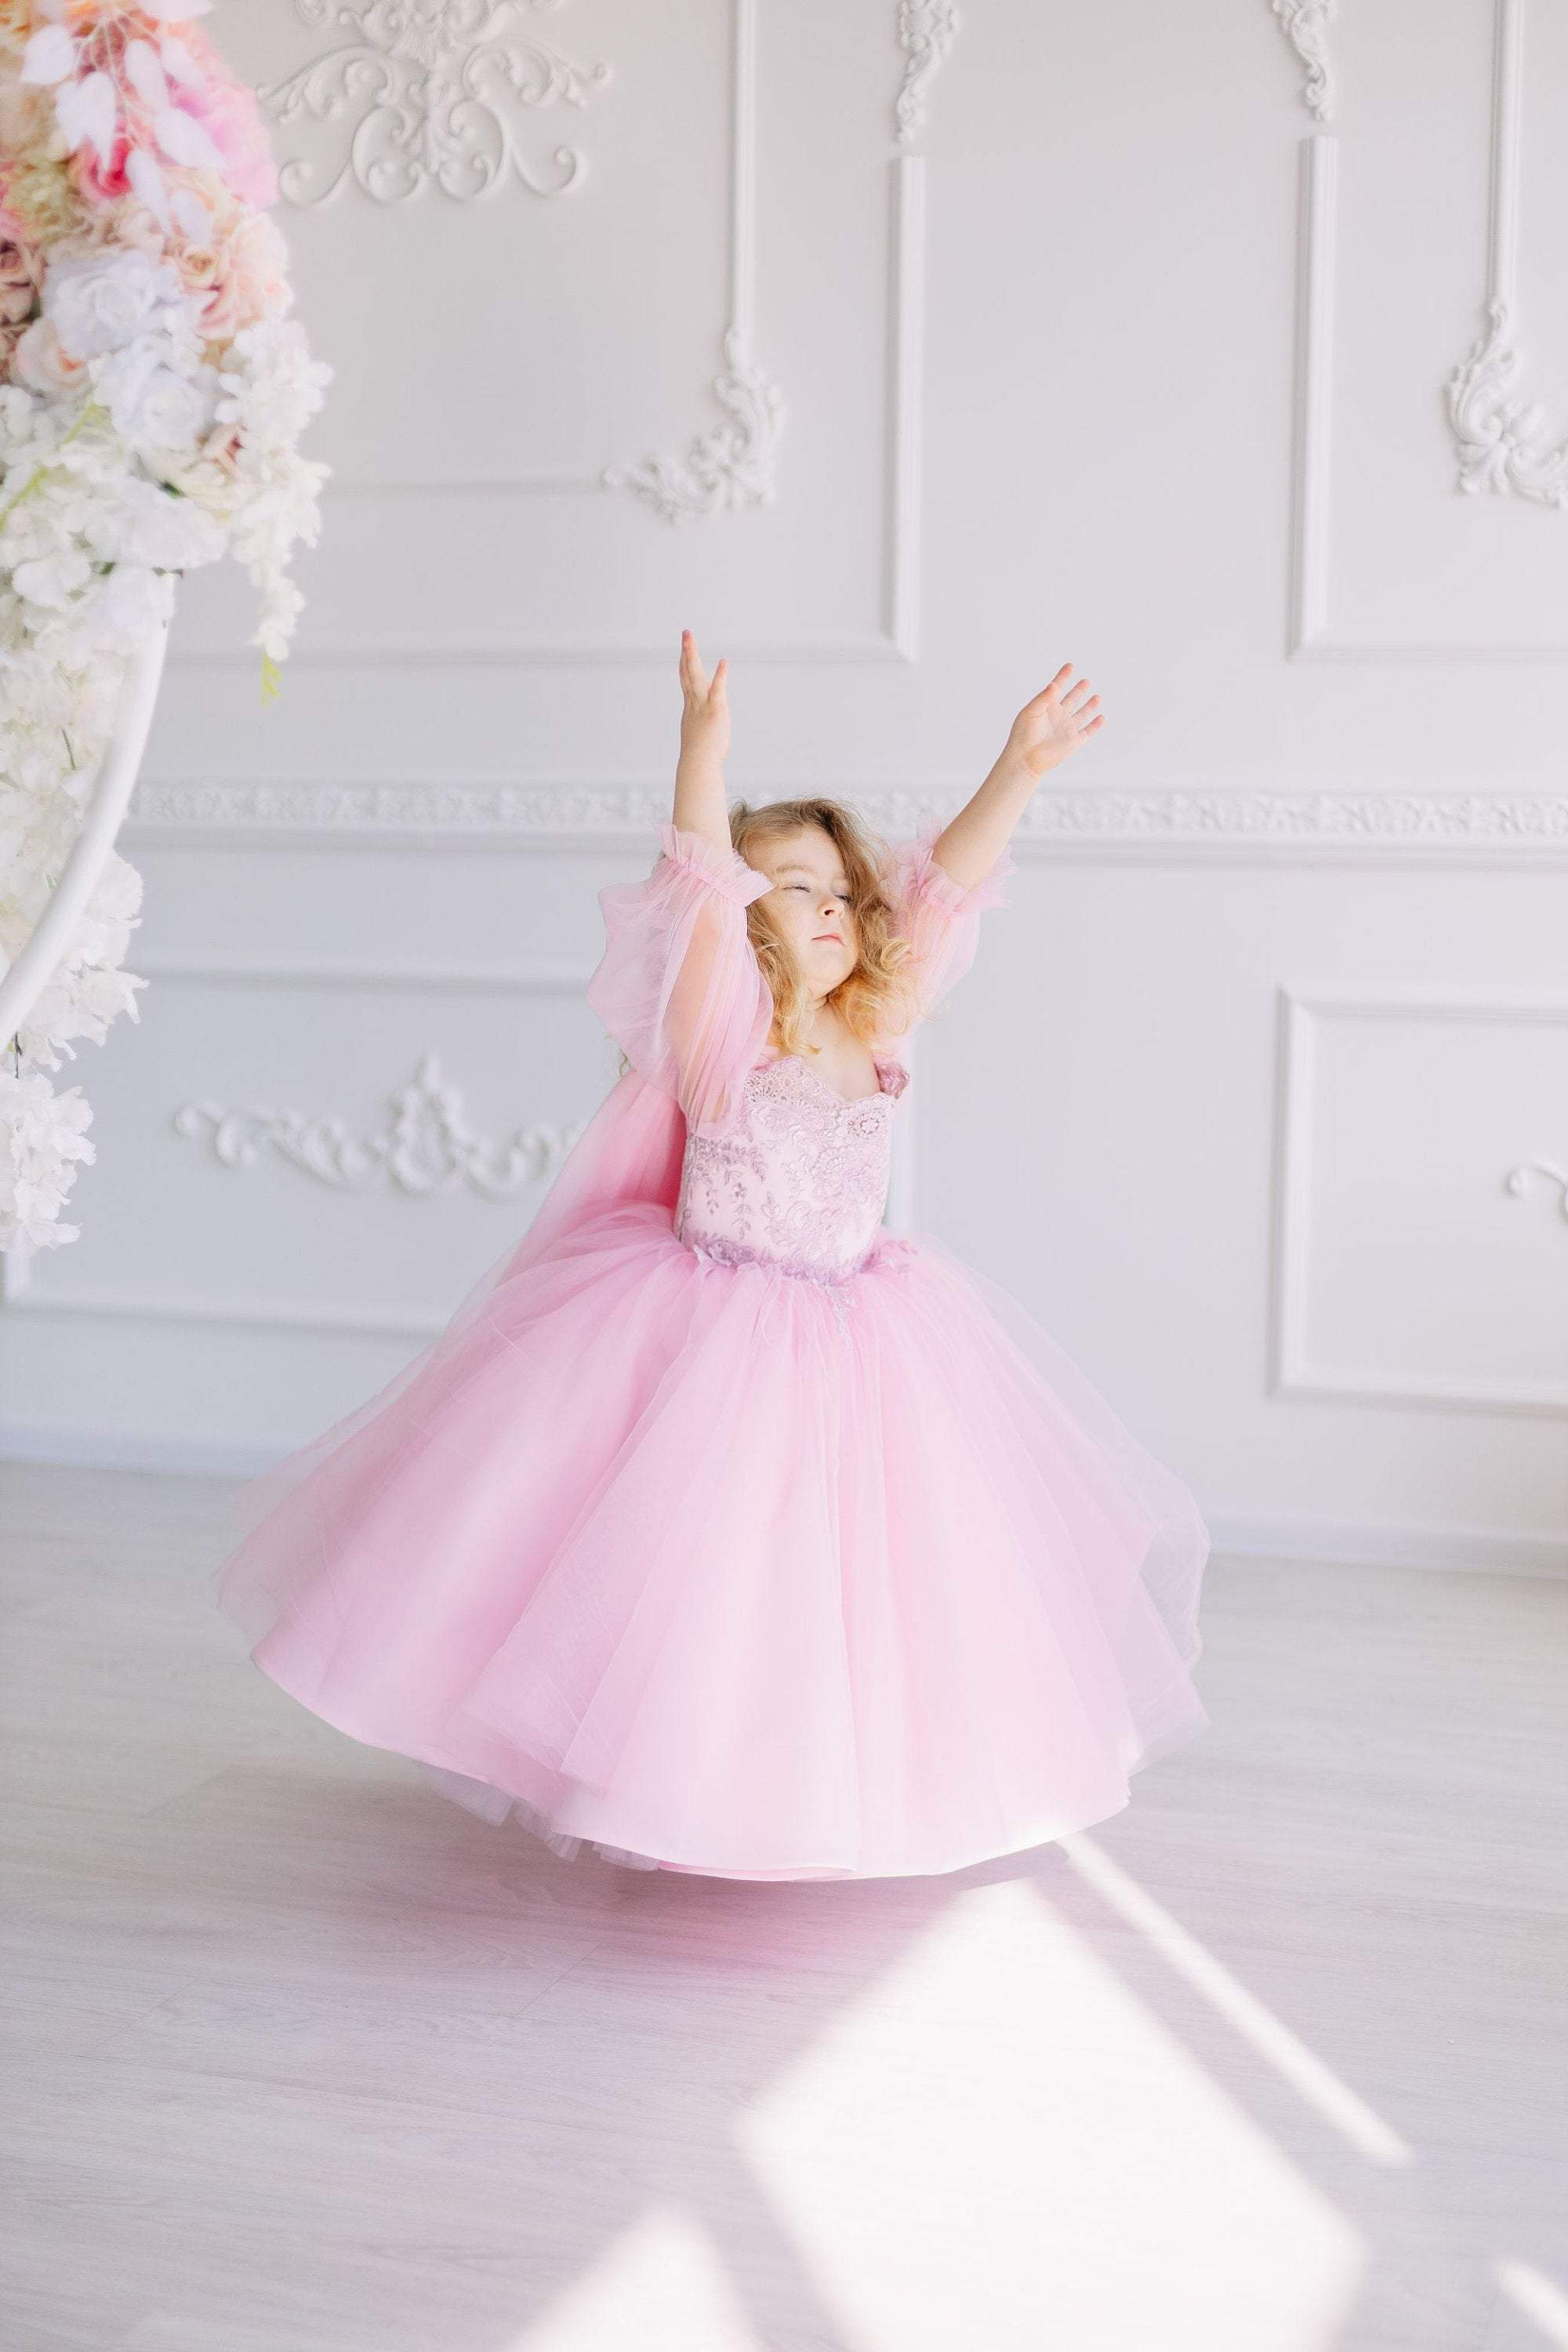 Buy RUMOUR 6M-24M Toddler Baby Girl Birthday Wedding Party Flower Dresses  Tutu Gown Dress Pink at Amazon.in